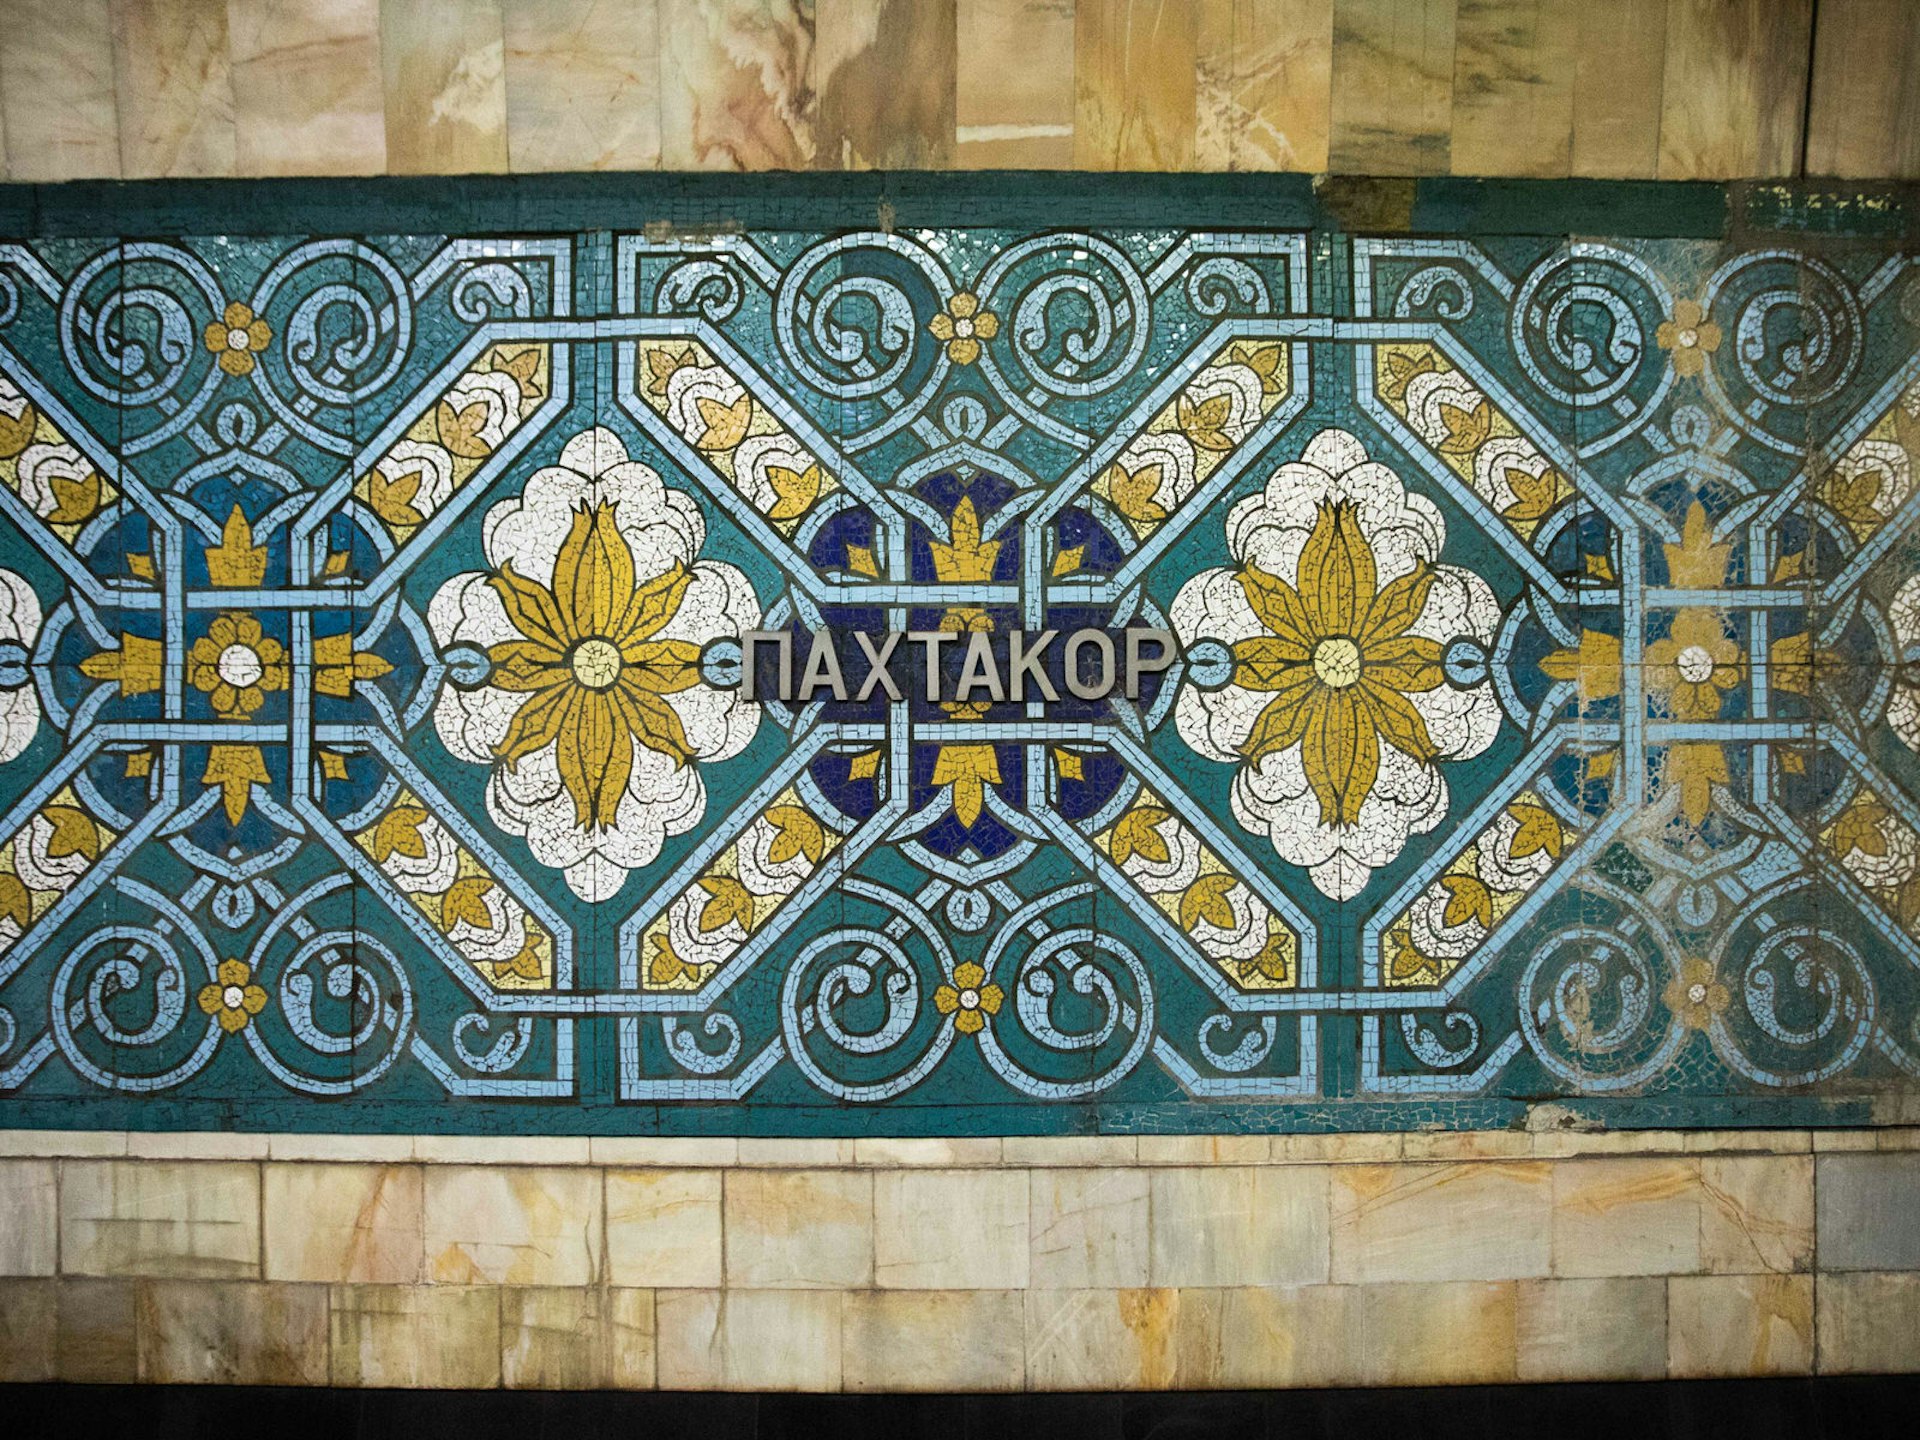 The walls of Pakhtakor station bearing the station name surrounded by ornate blue and green Uzbek mosaics.